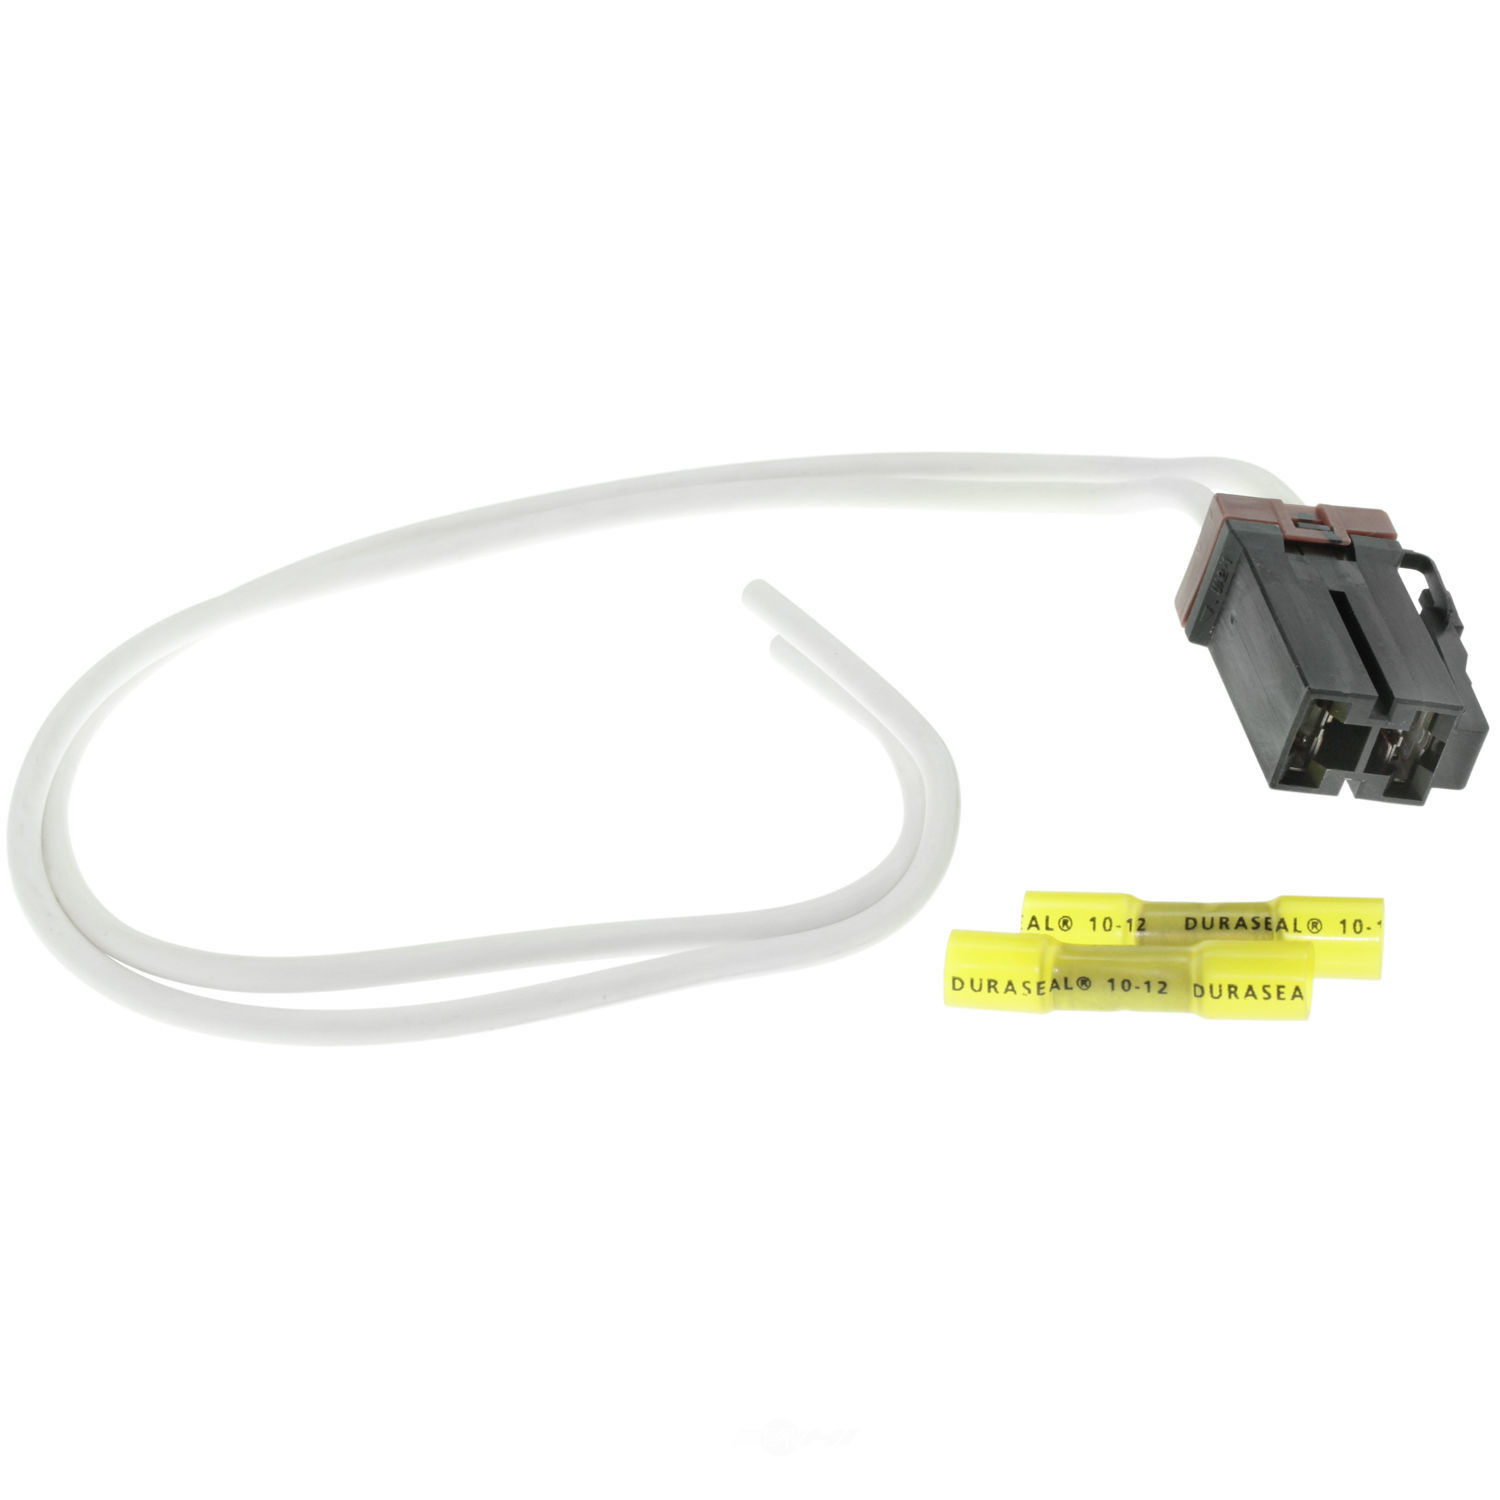 WVE - Junction Block Wiring Harness Connector - WVE 1P2012